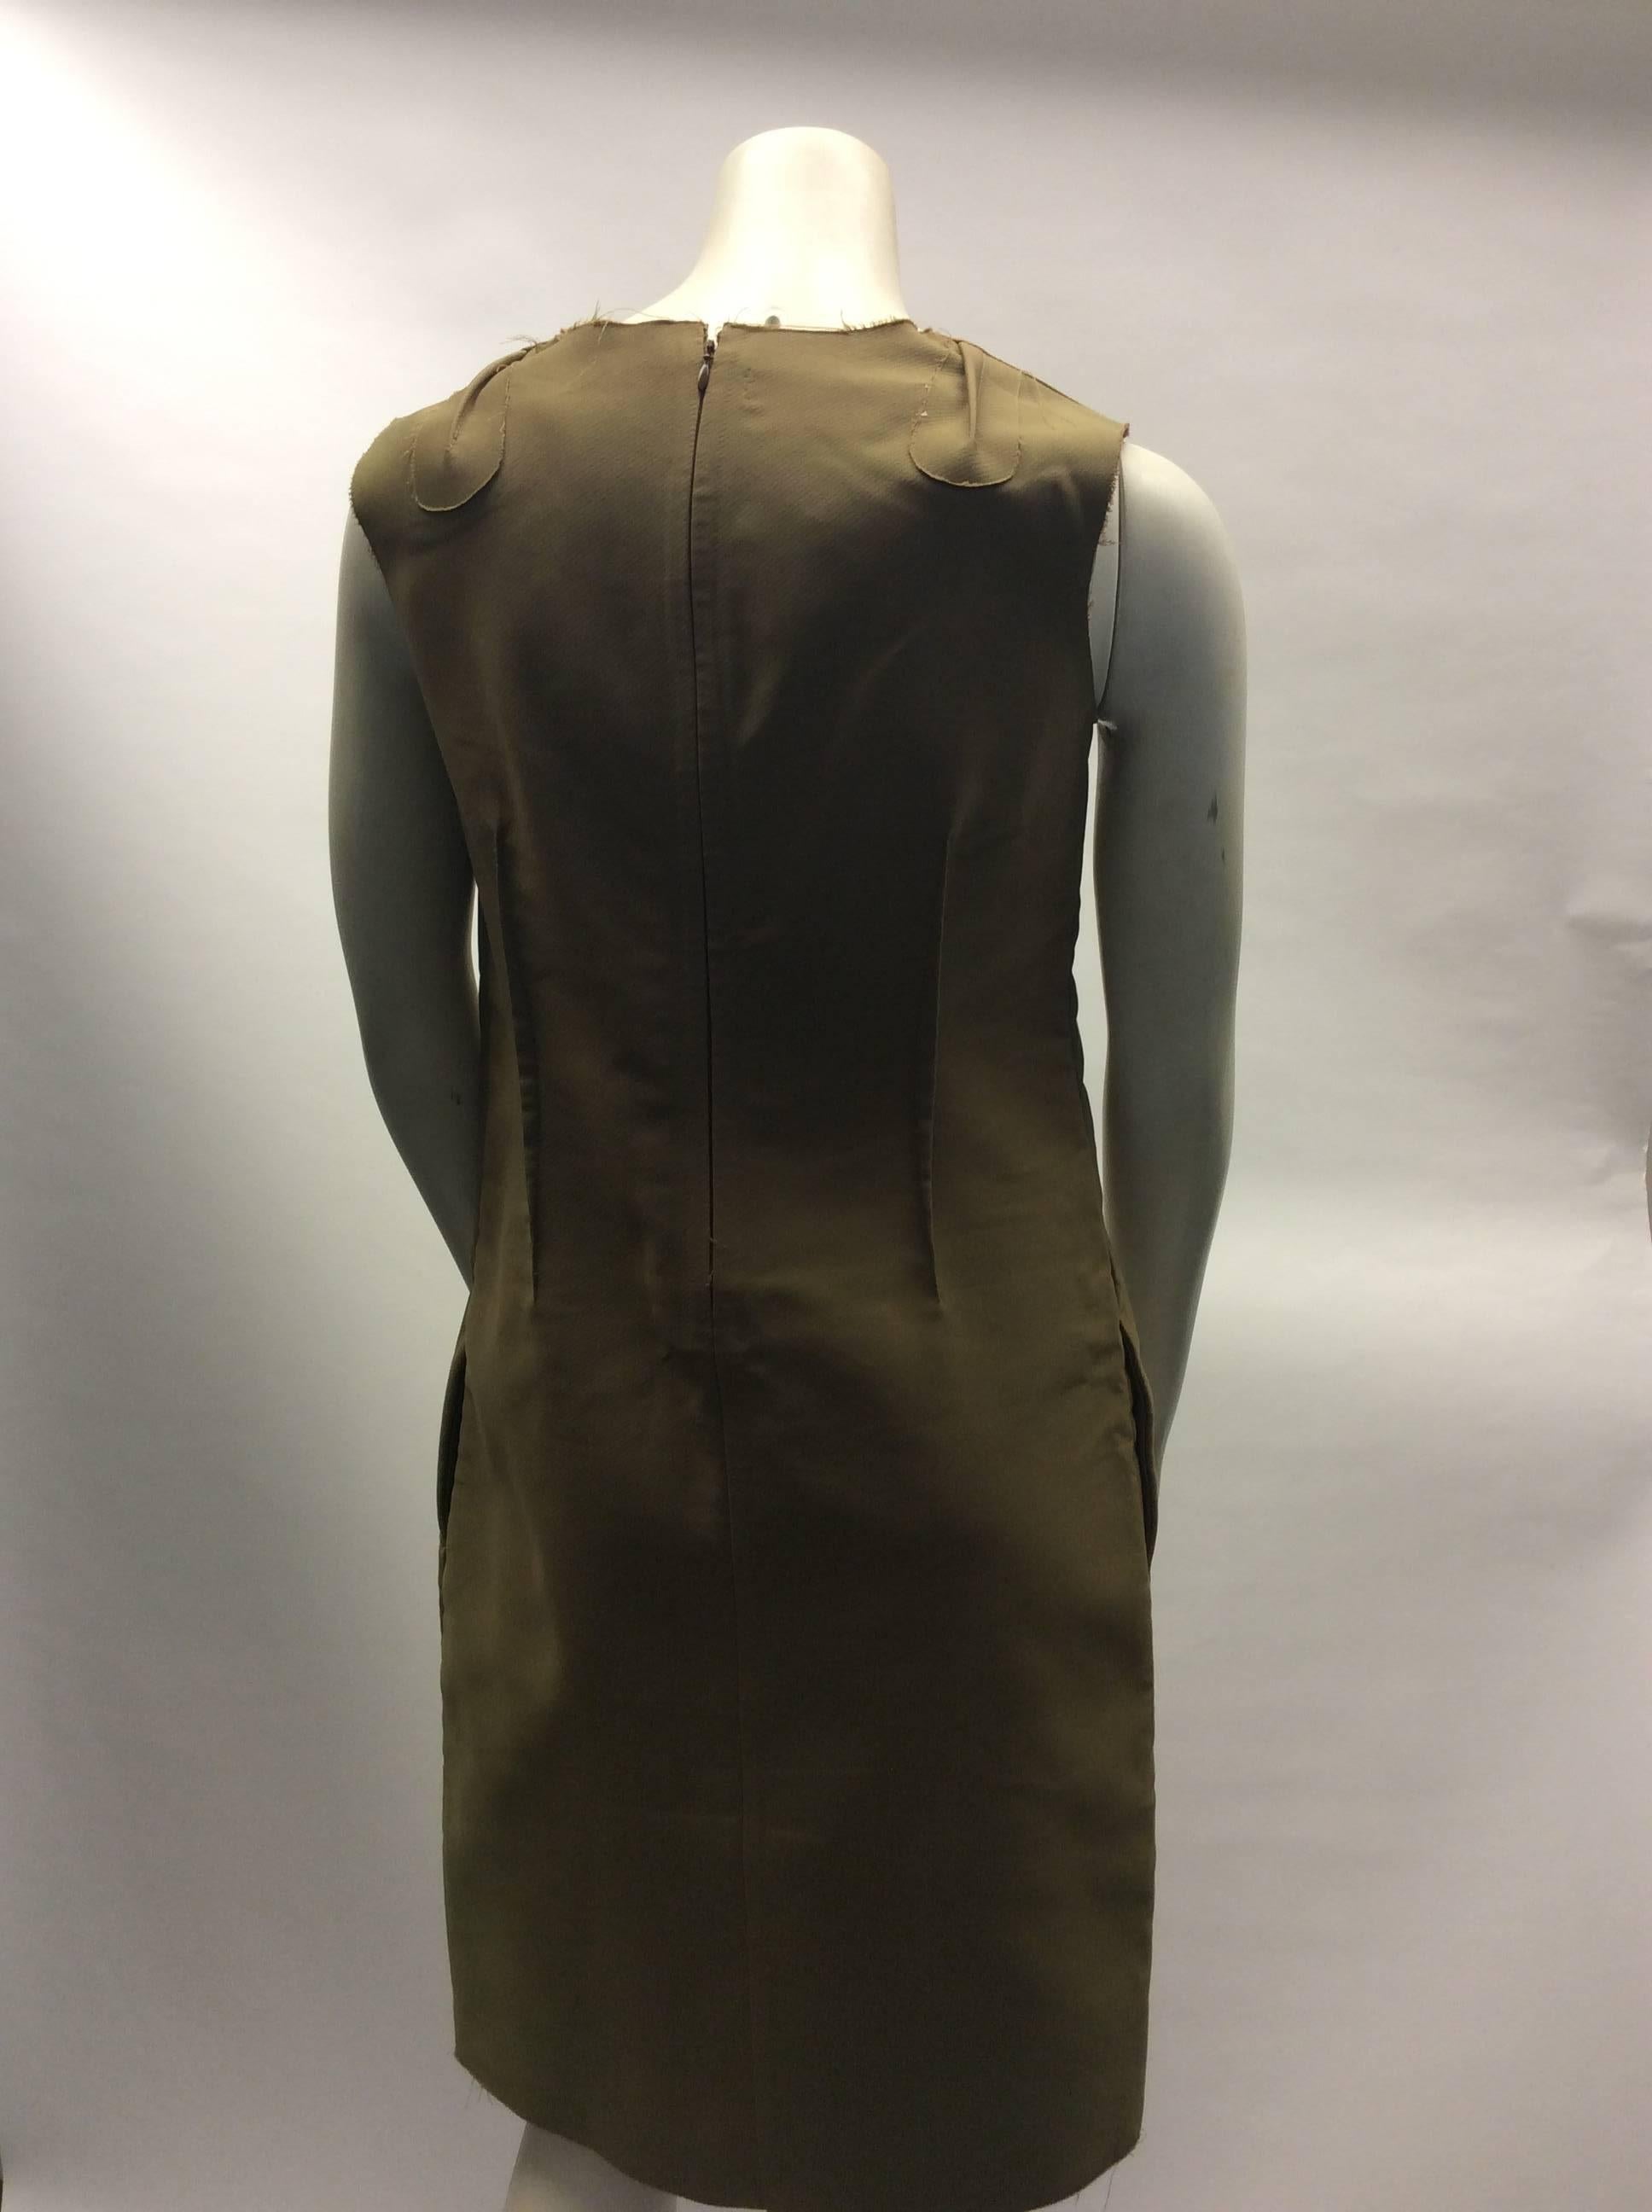 Marni Khaki Frayed Shift Dress In Excellent Condition For Sale In Narberth, PA